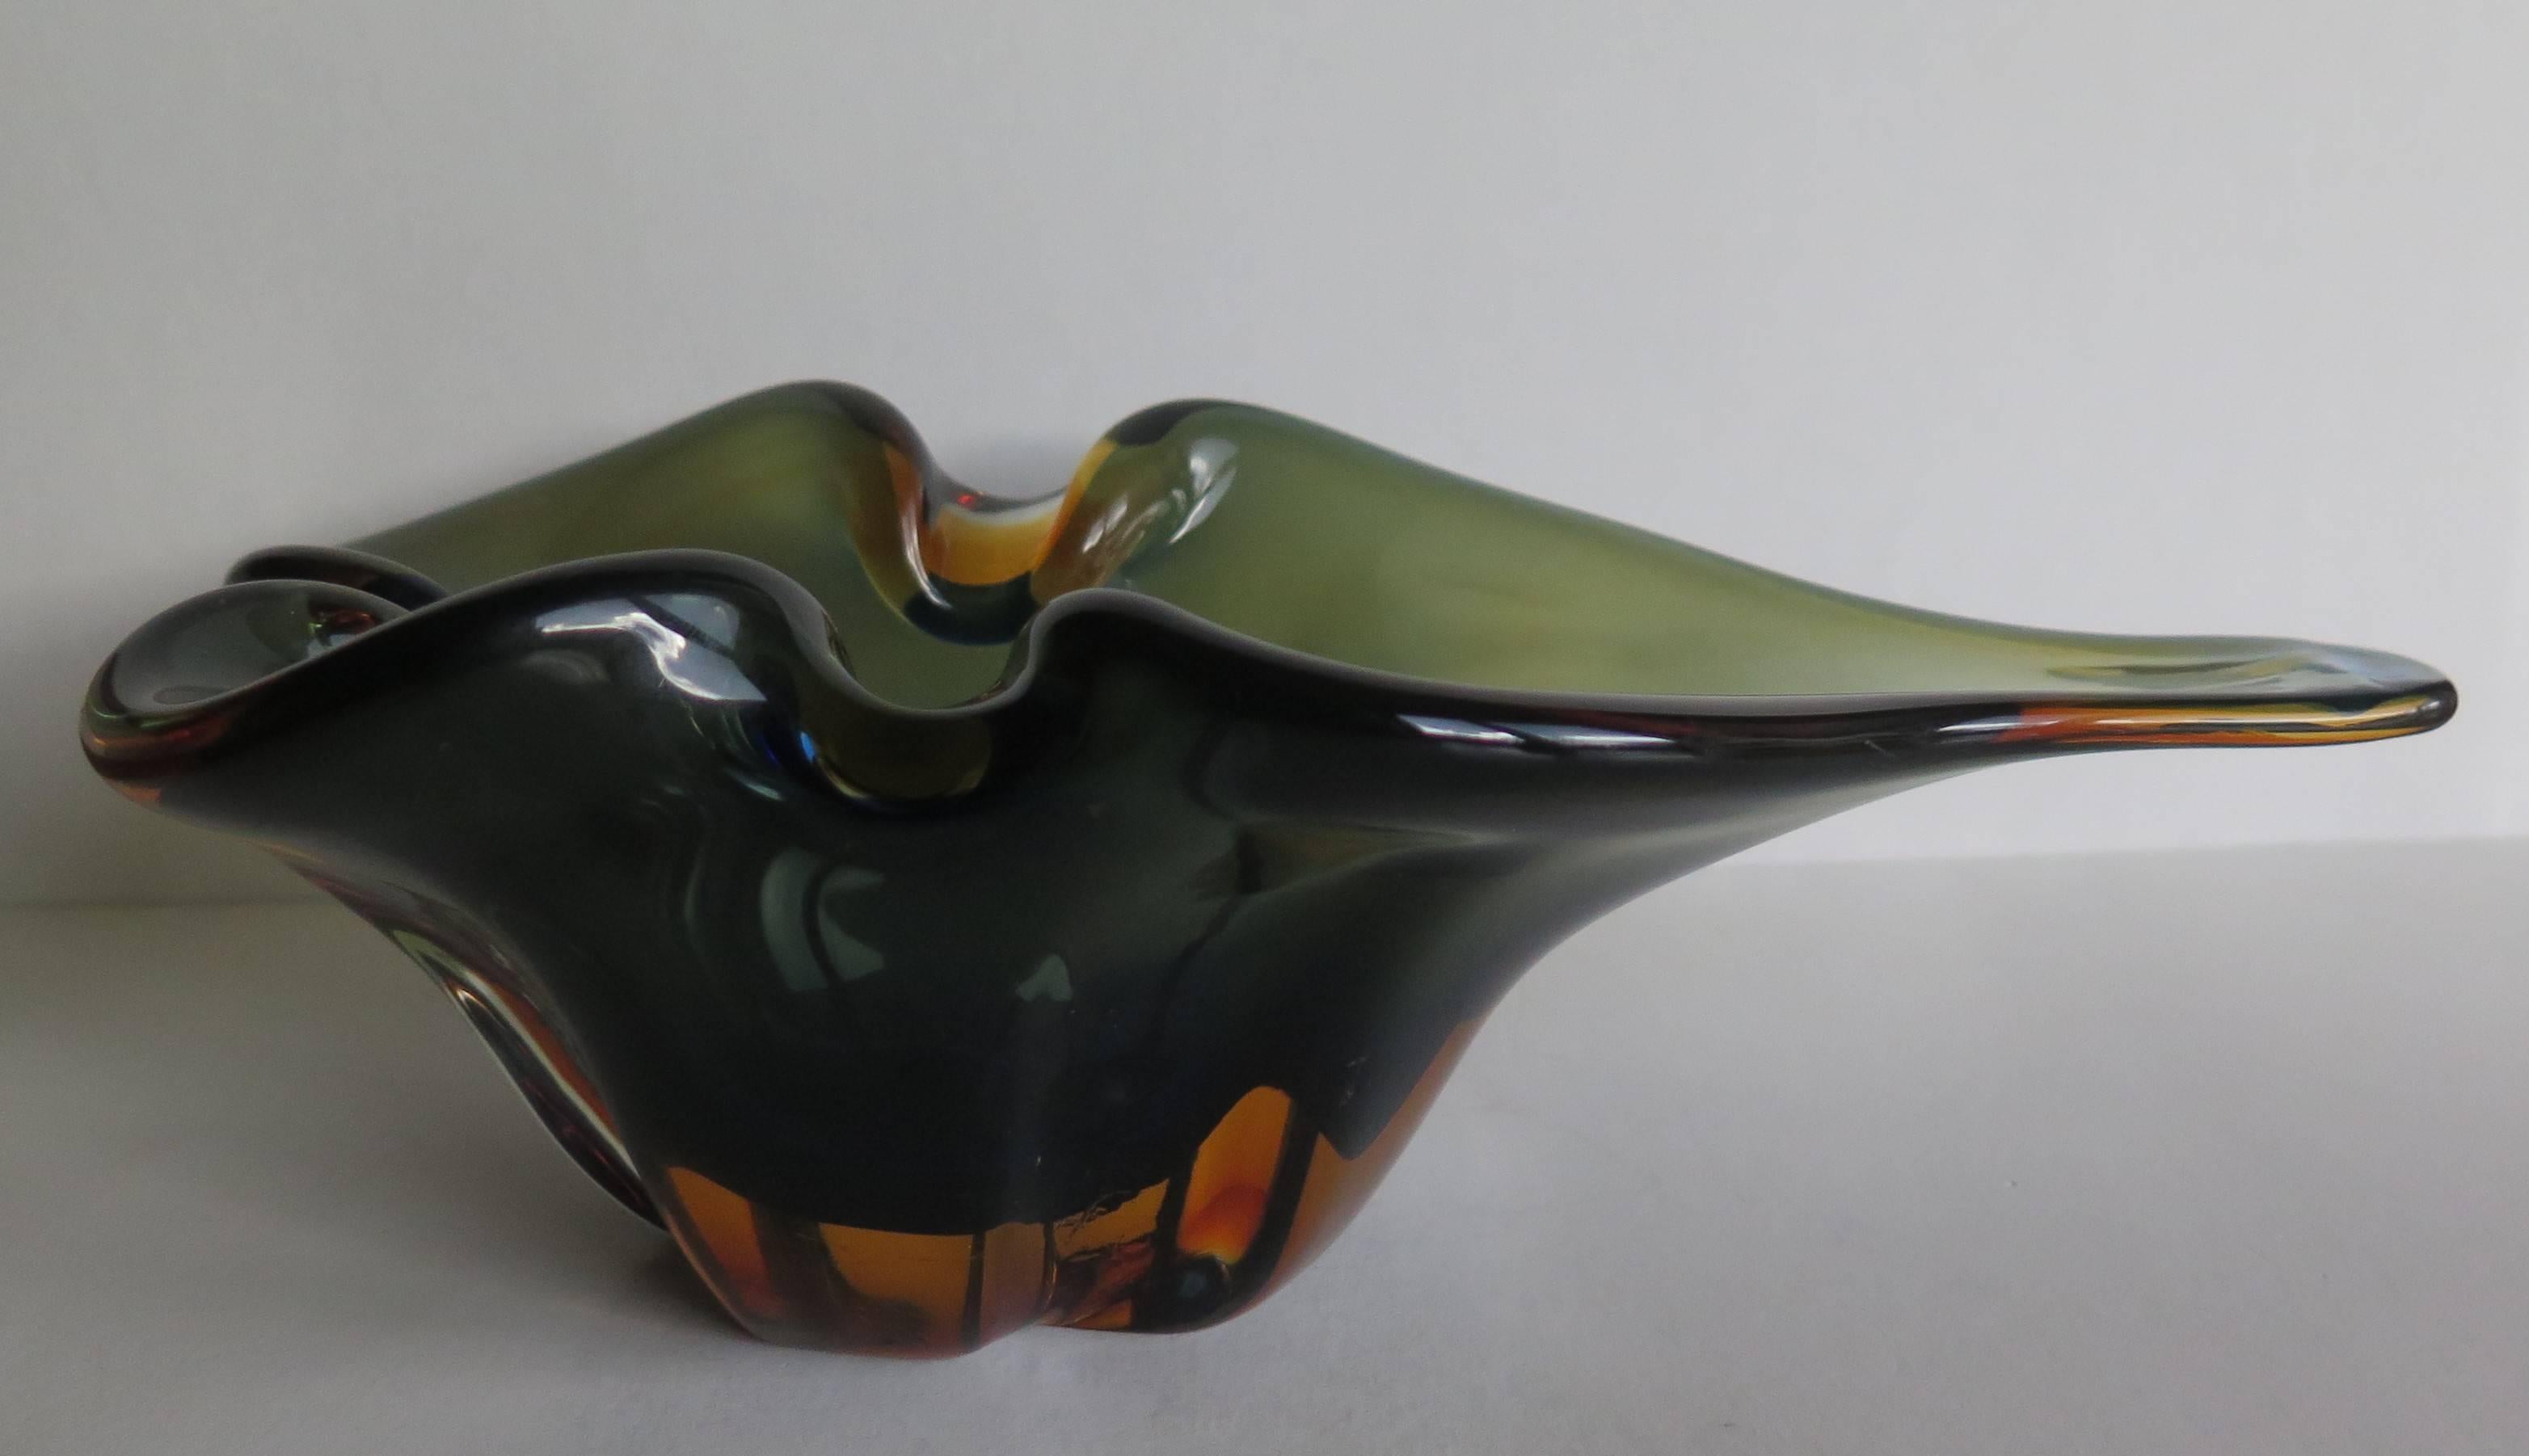 This bowl is a beautiful and elegant example of Murano glass which we attribute to the designer Flavio Poli made for Seguso Vetri d'Arte in the mid 20th Century.

This heavy glass bowl has a typical modern asymmetrical curving form, with the very